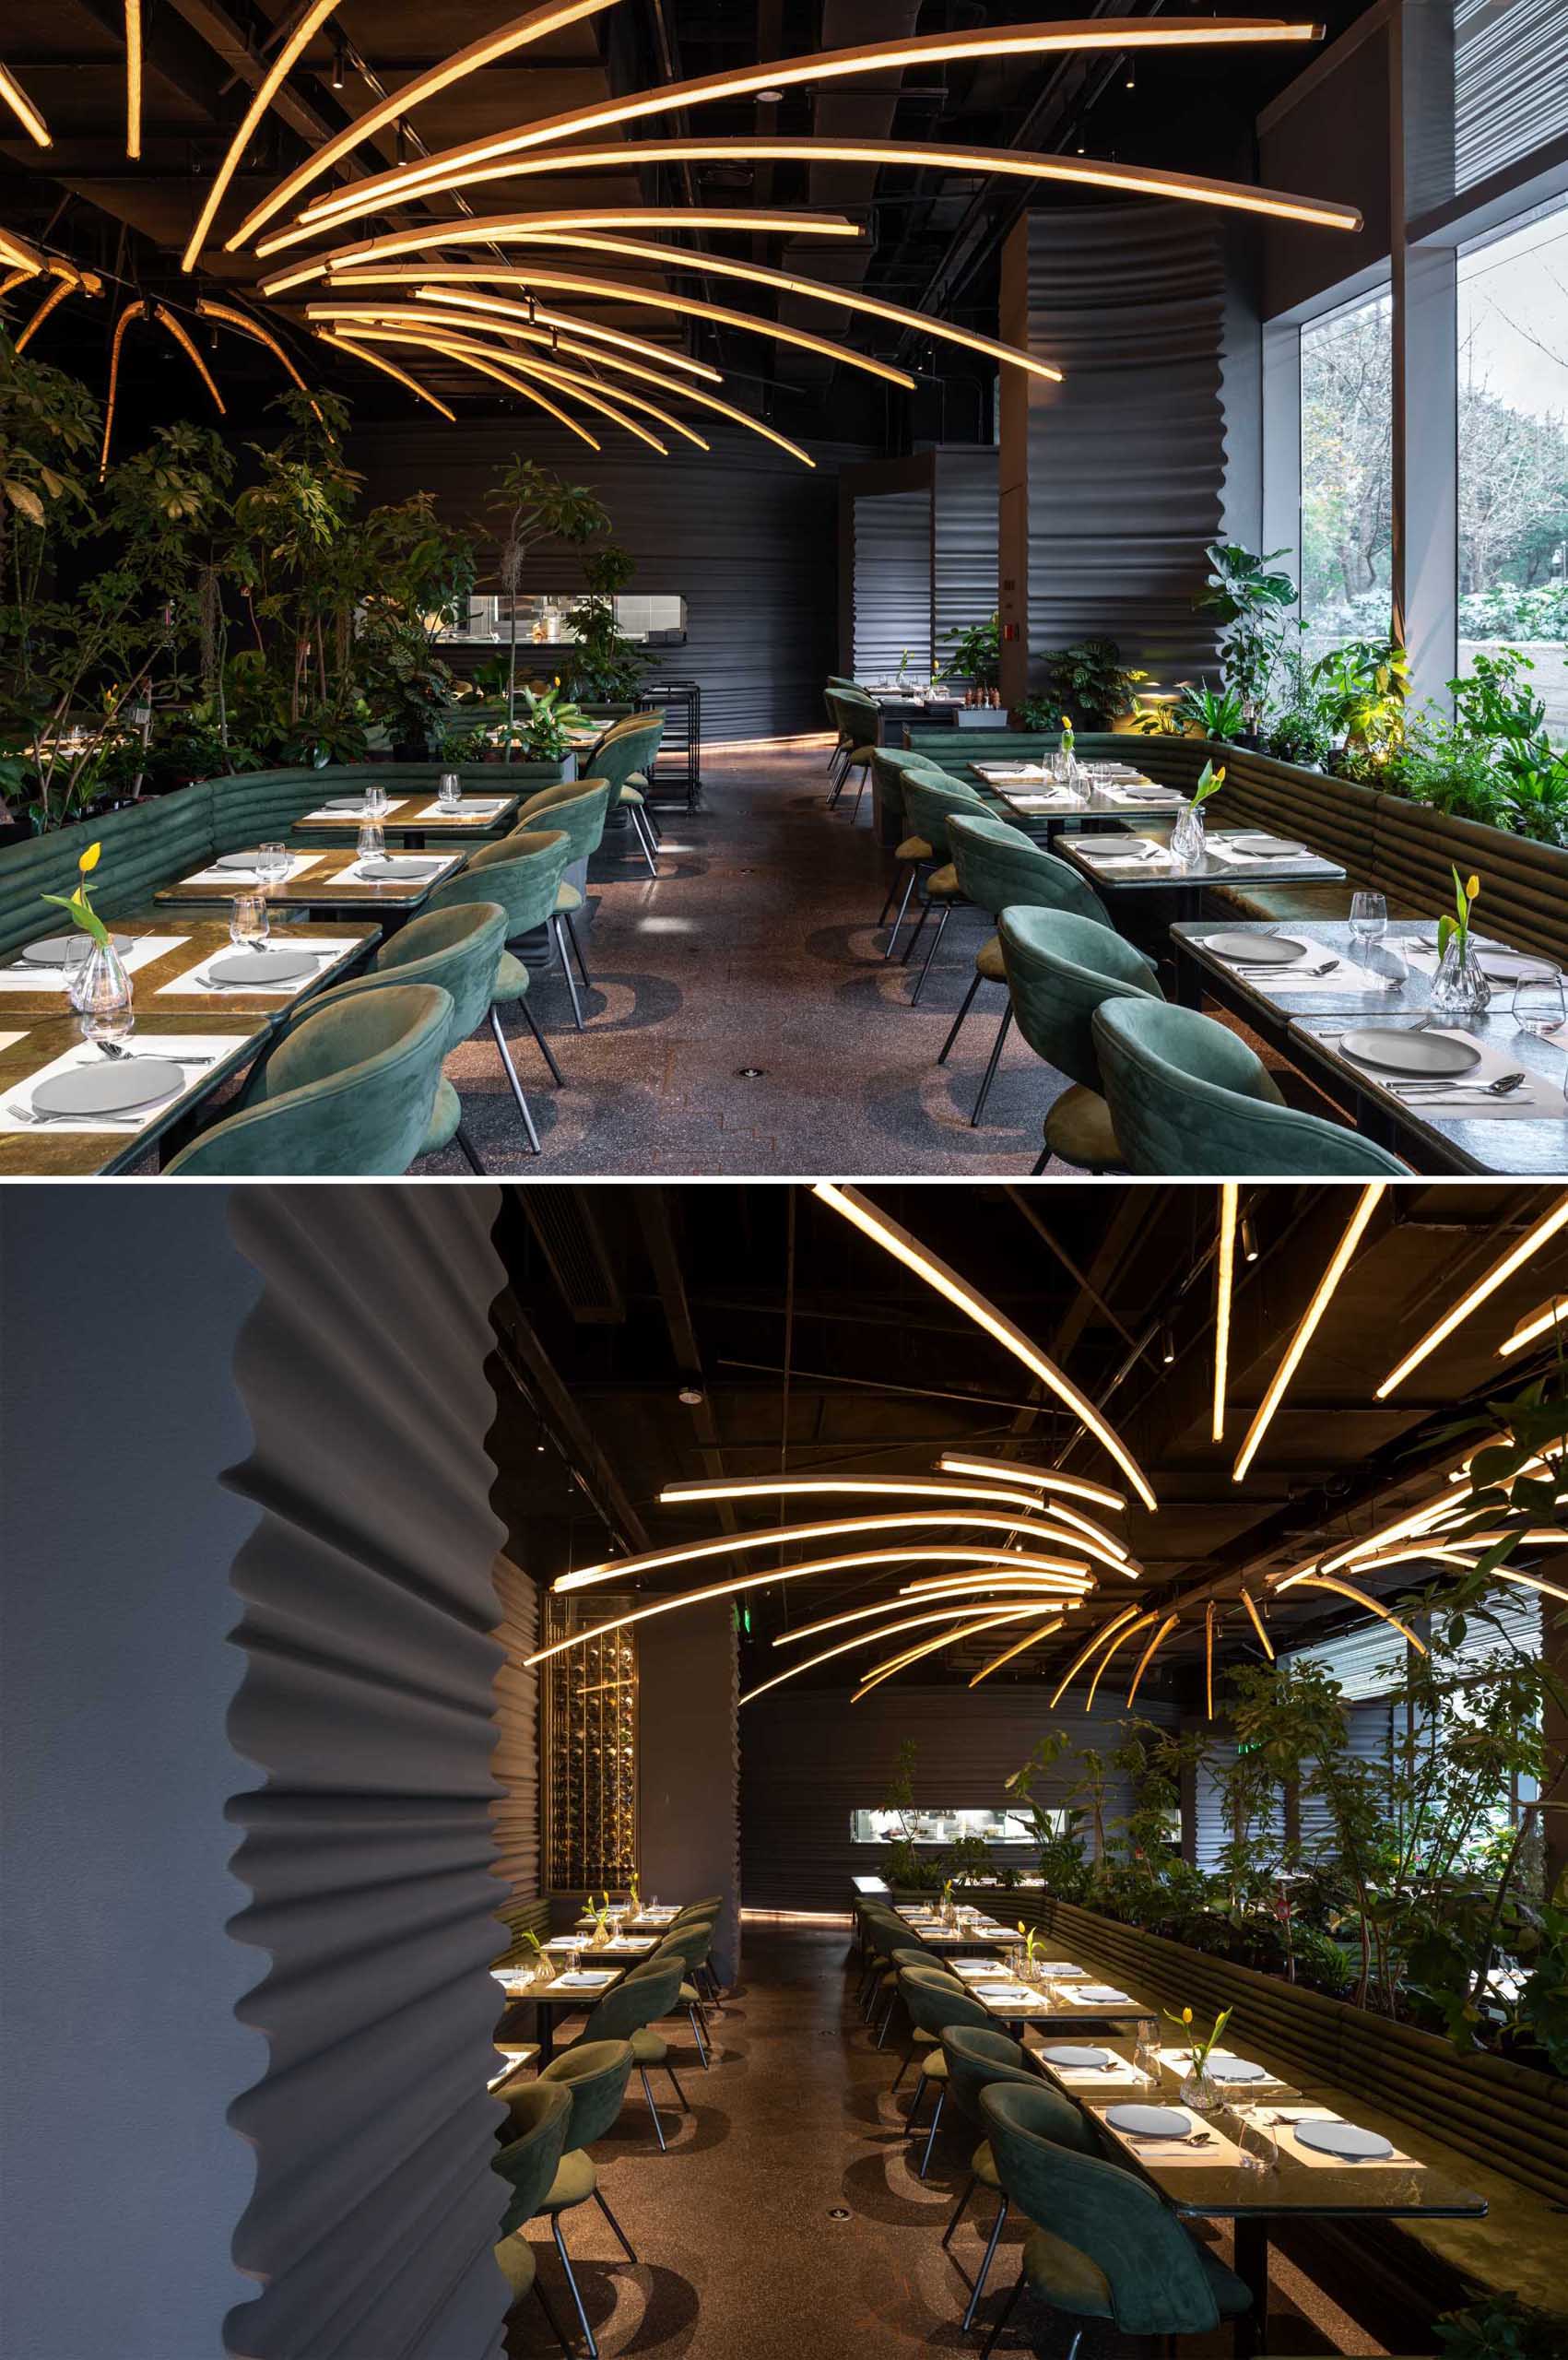 A modern restaurant with curved sculptural walls, and a lighting installation inspired by fire.